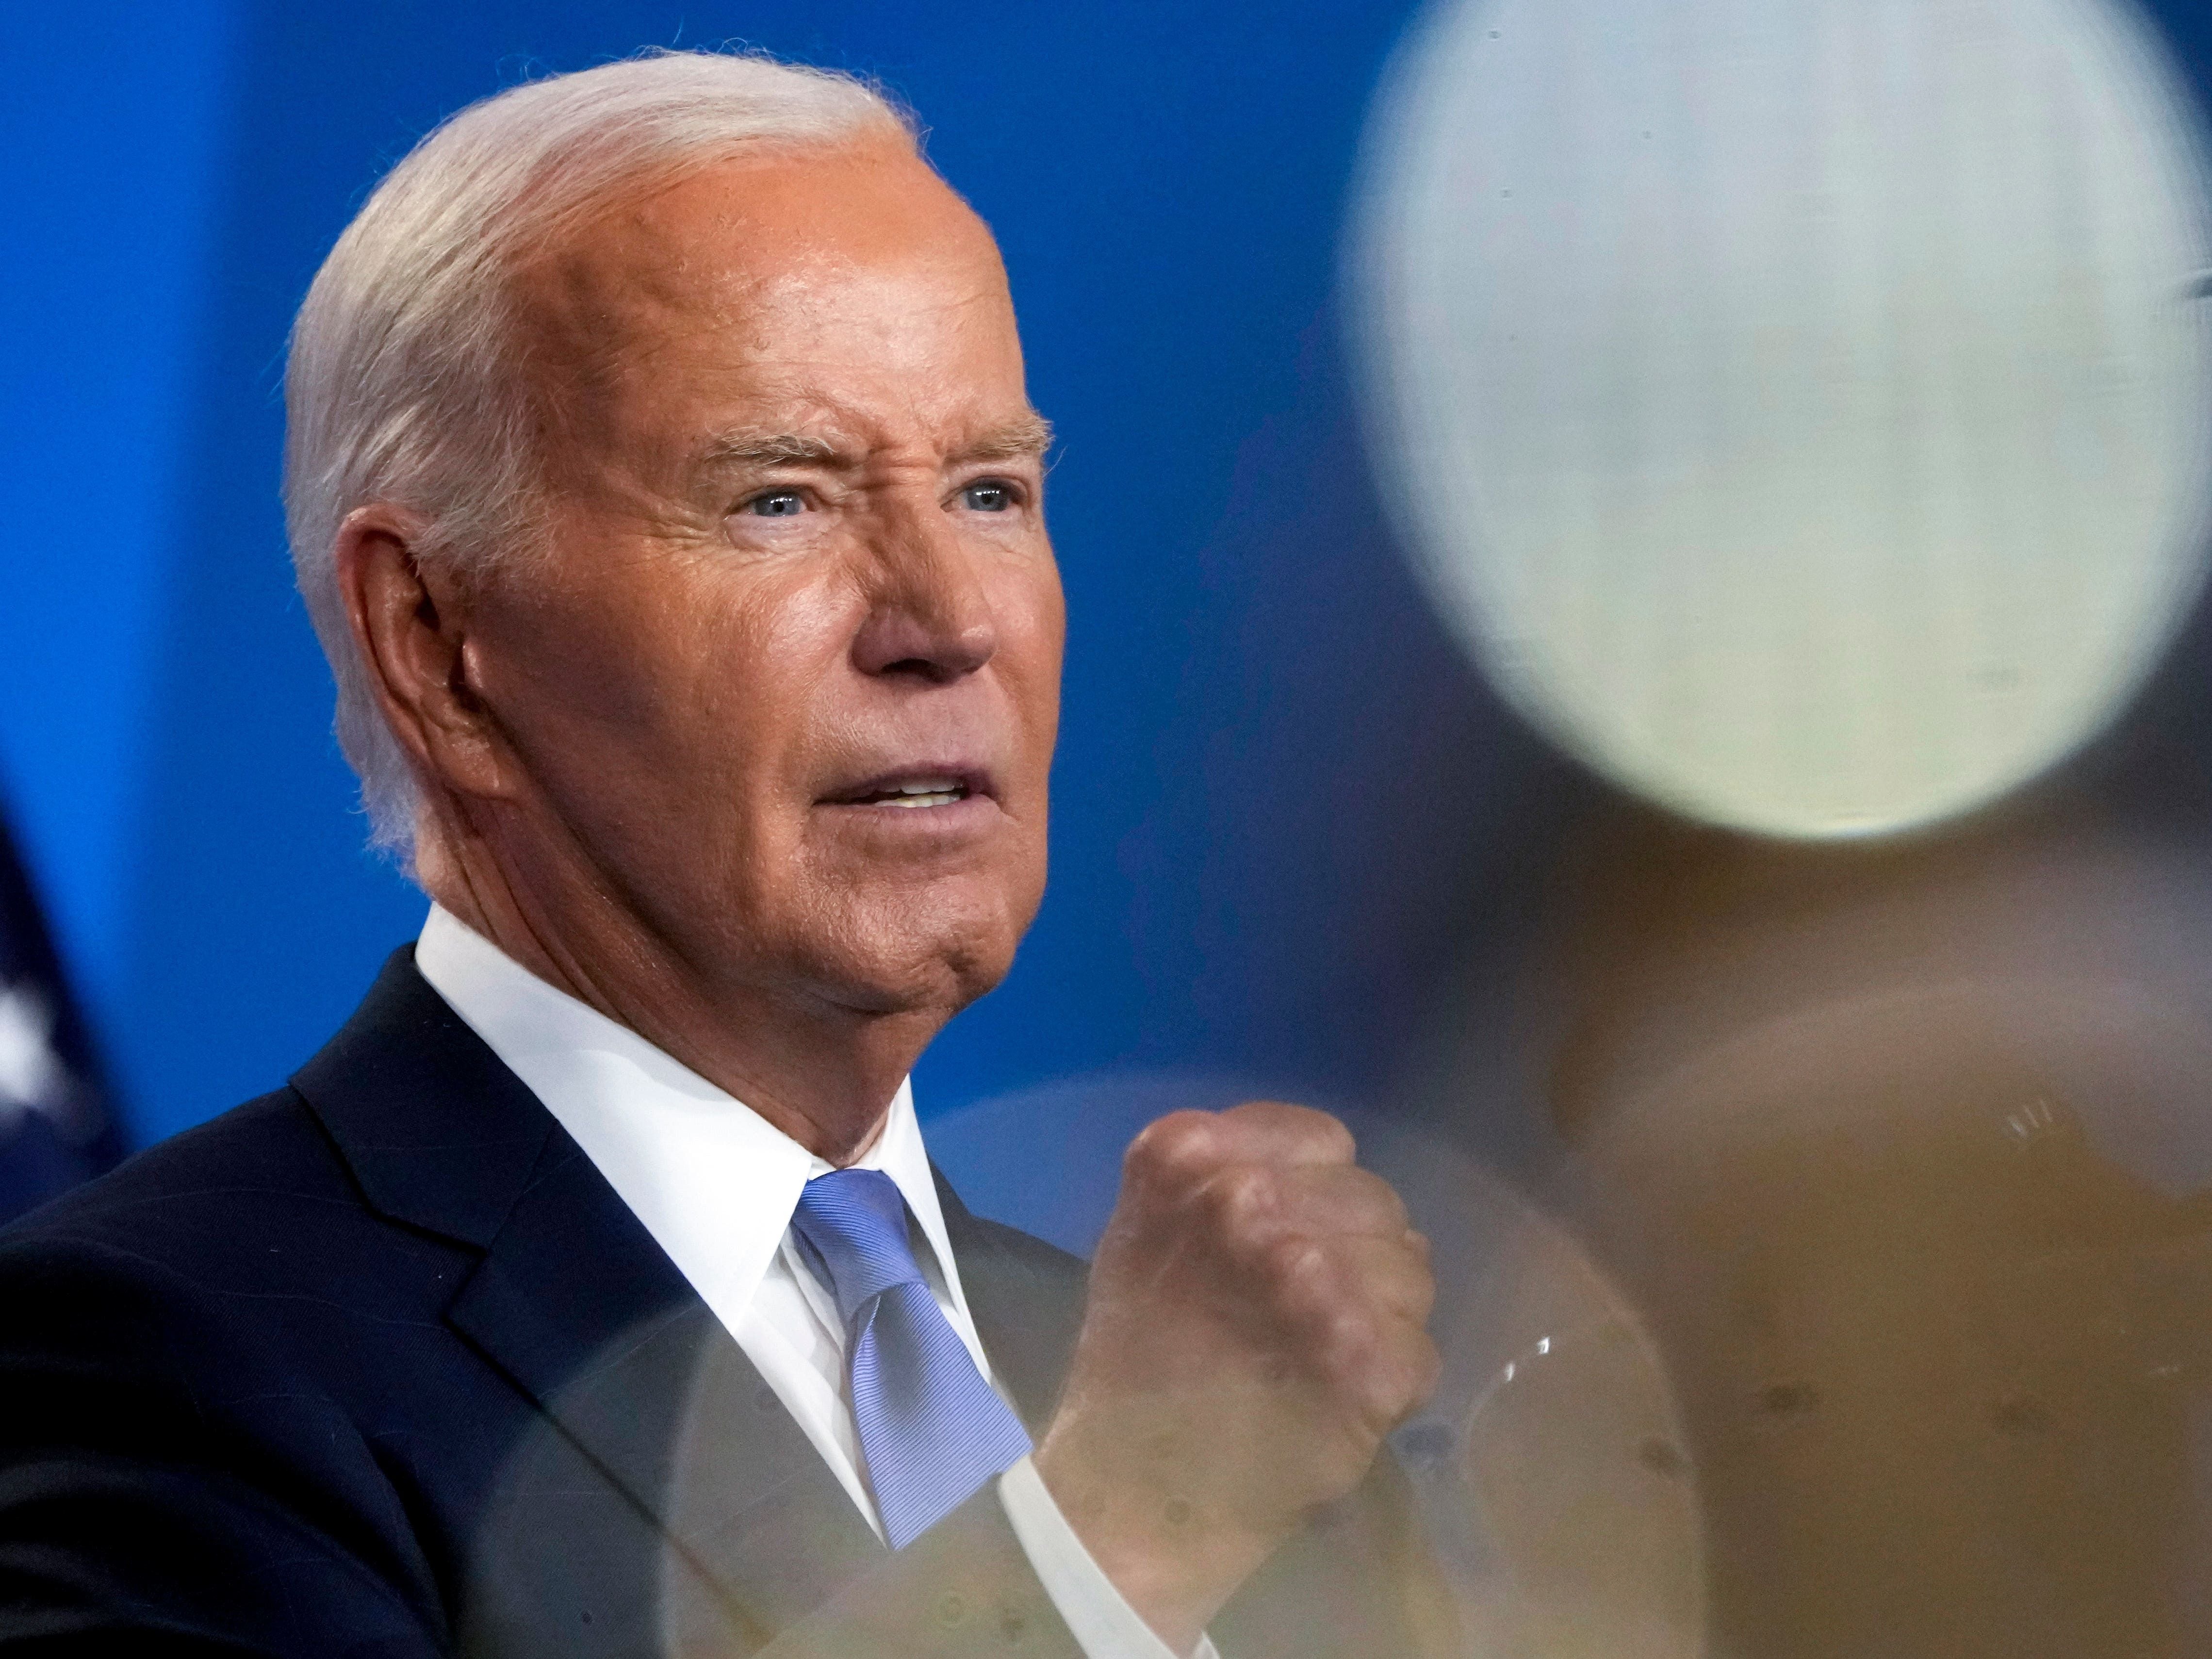 Biden set for return to campaign trail in eye of Democrat storm over his future